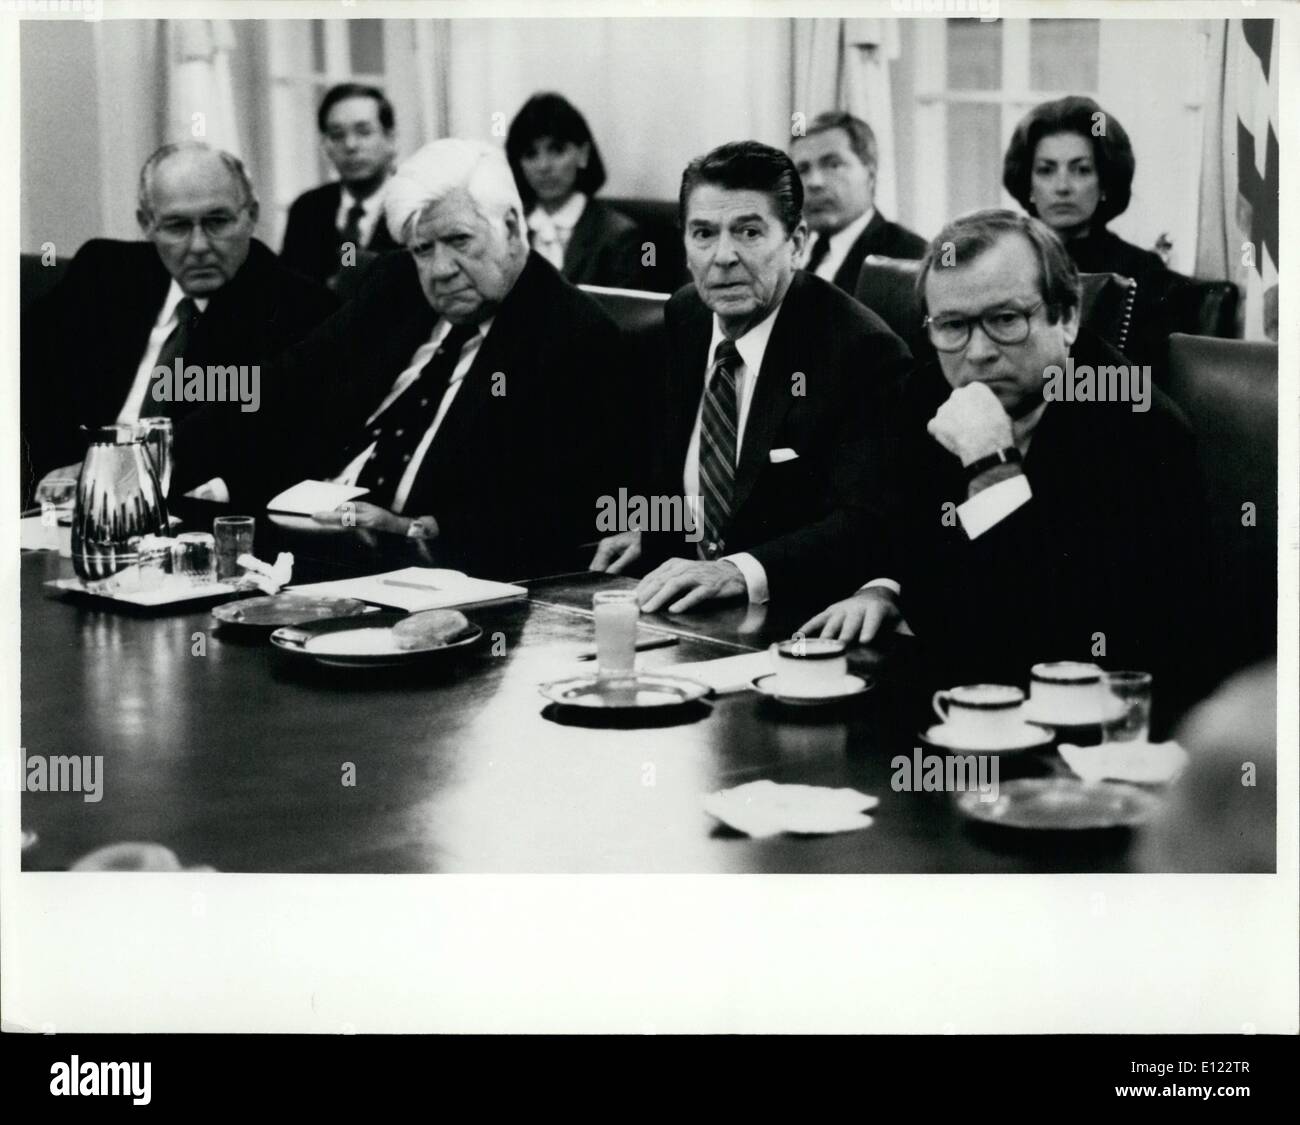 Oct. 10, 1983 - President Reagan and Congressional leaders listens to Sec. of State George Schultz listen then on the Grenada situation at an 8:15 a.m. meeting in the Cabinet Room of the White House today L-r are: Rep. Bob Michel; Speaker of the House, Tip O'Neill; The President and Senator Howard Baker. Stock Photo